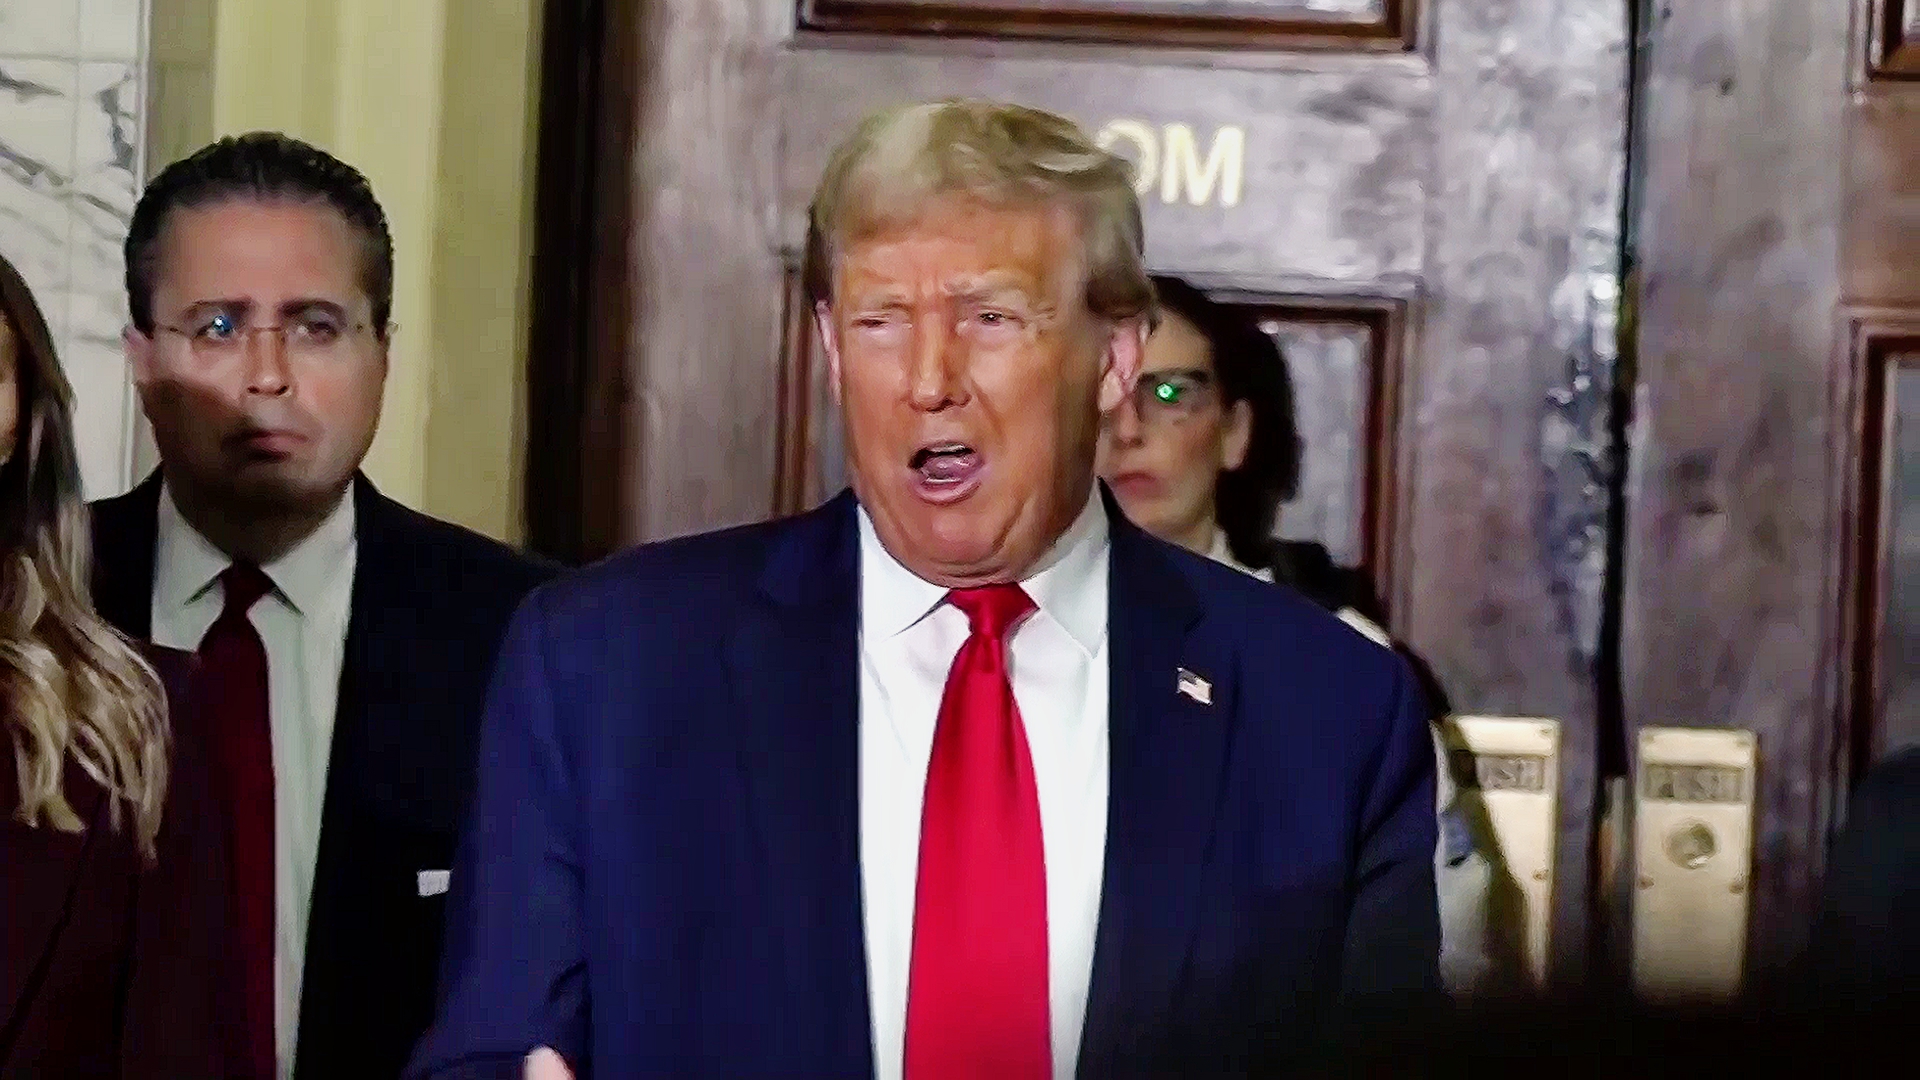 Trump Attacks Judge in Unhinged 2AM Truth Social Post Hours Before Don Jr is Set to Testify: ‘Leave My Children Alone!’ (mediaite.com)